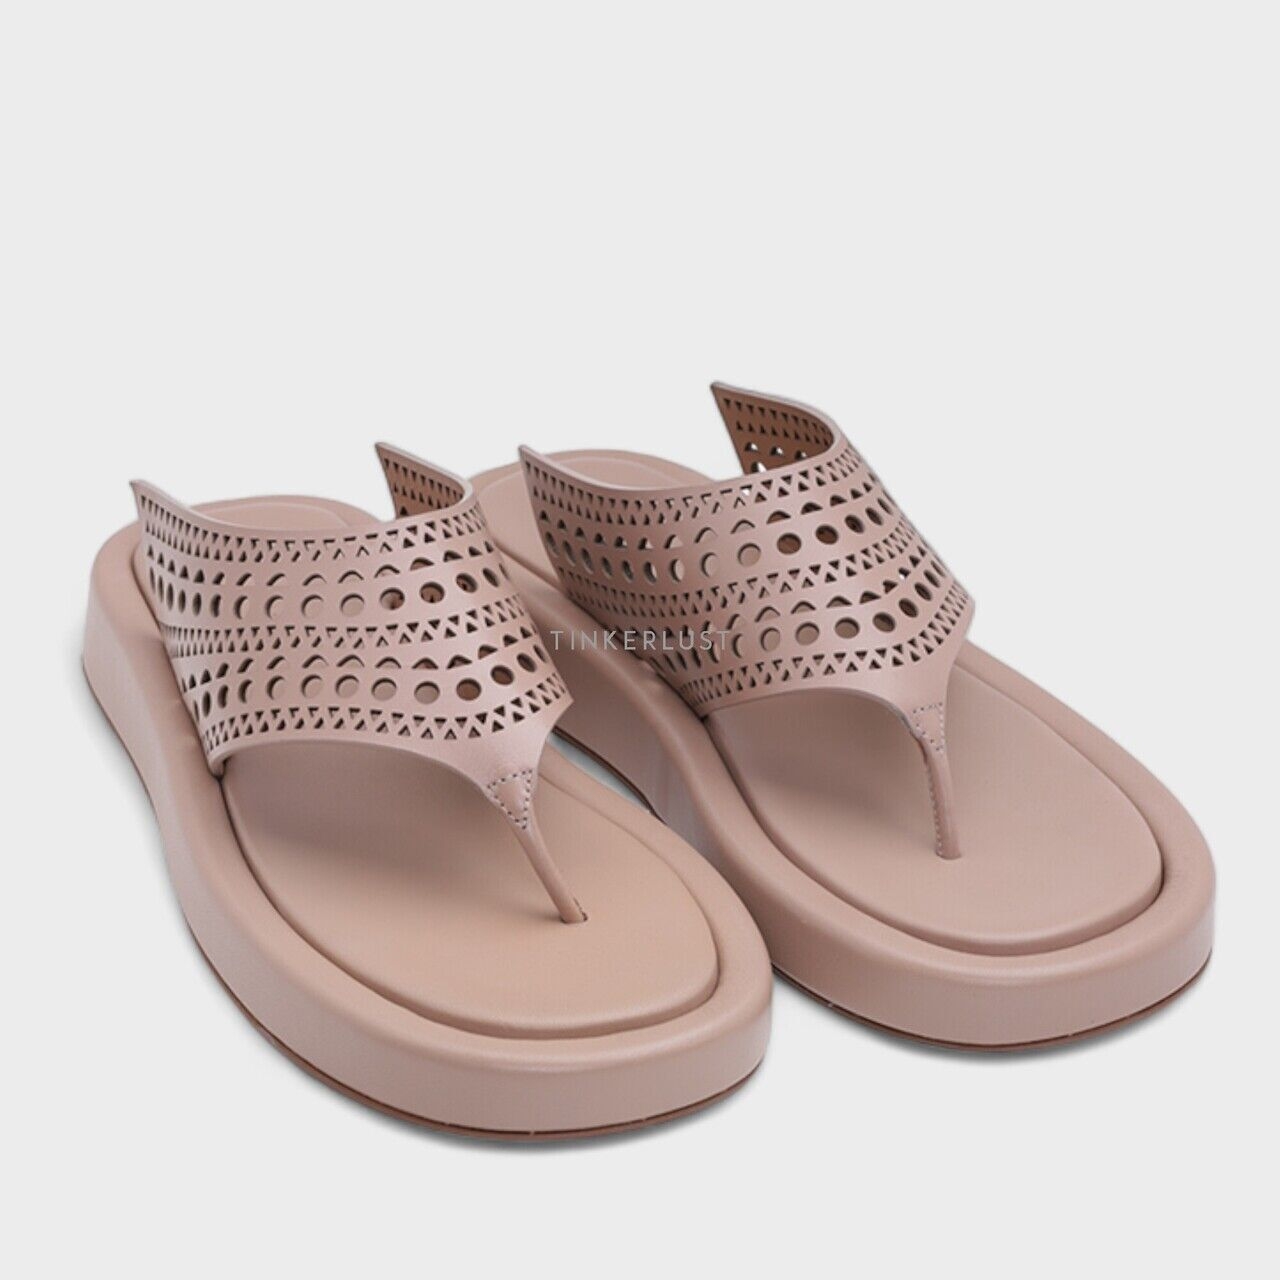 Alaia Lasered Cut Thong Nude Sandals